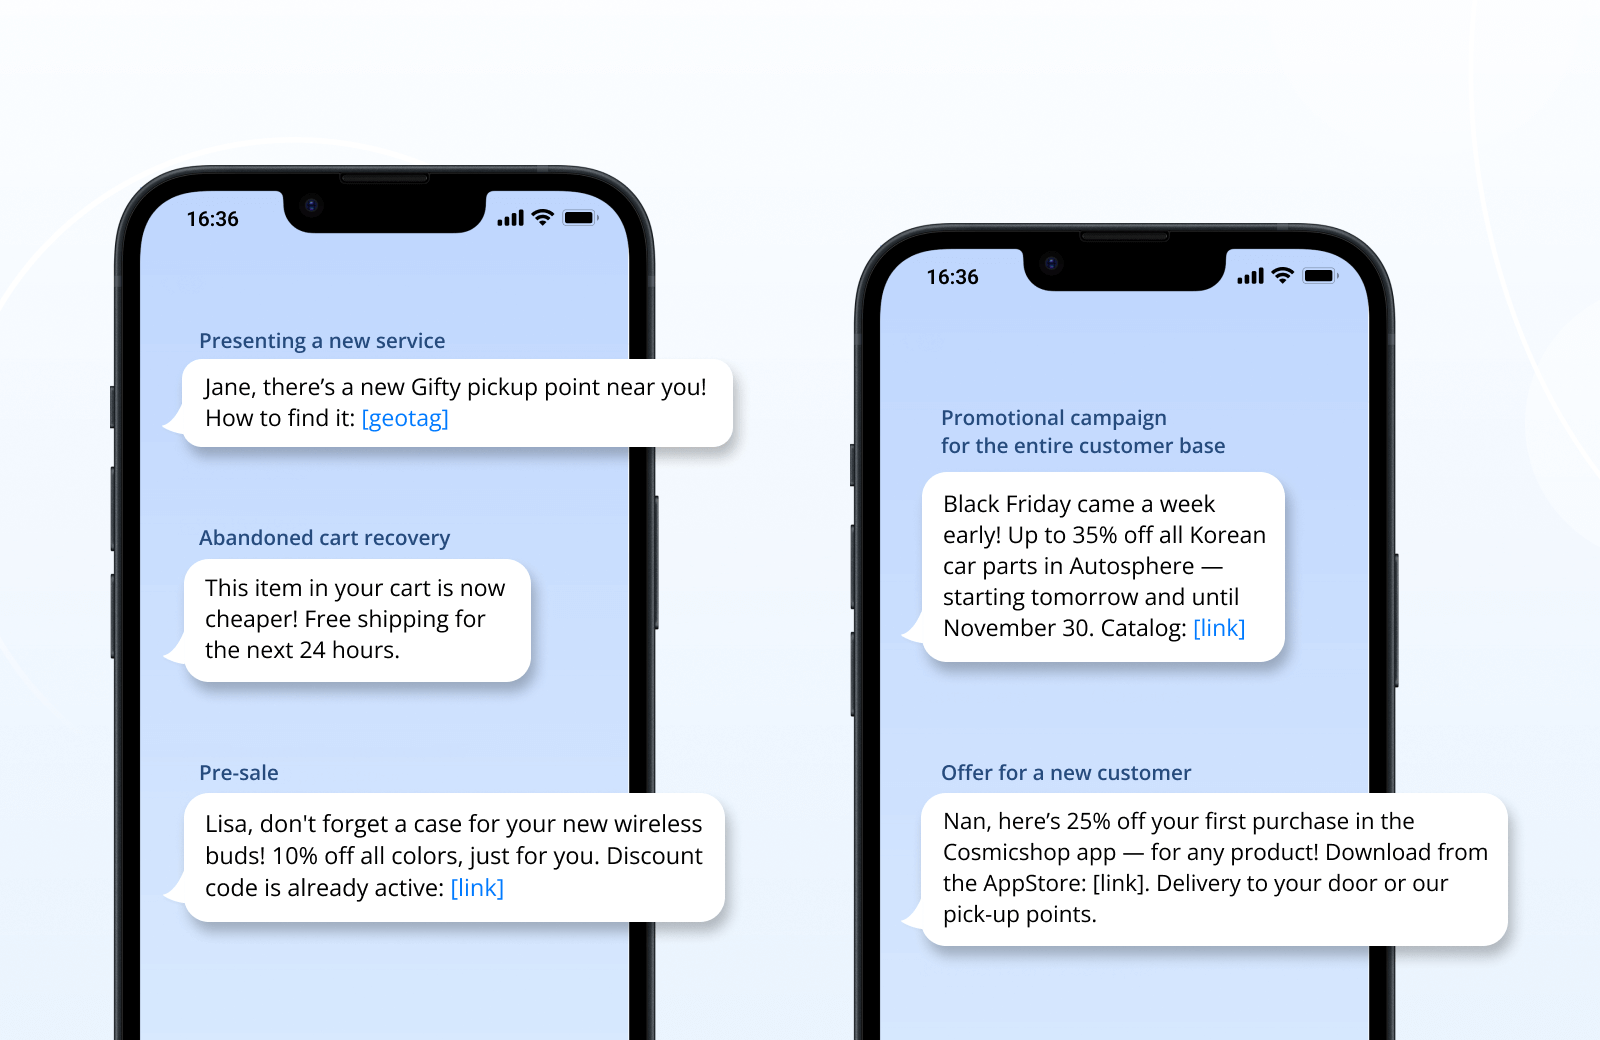 Examples of SMS campaigns